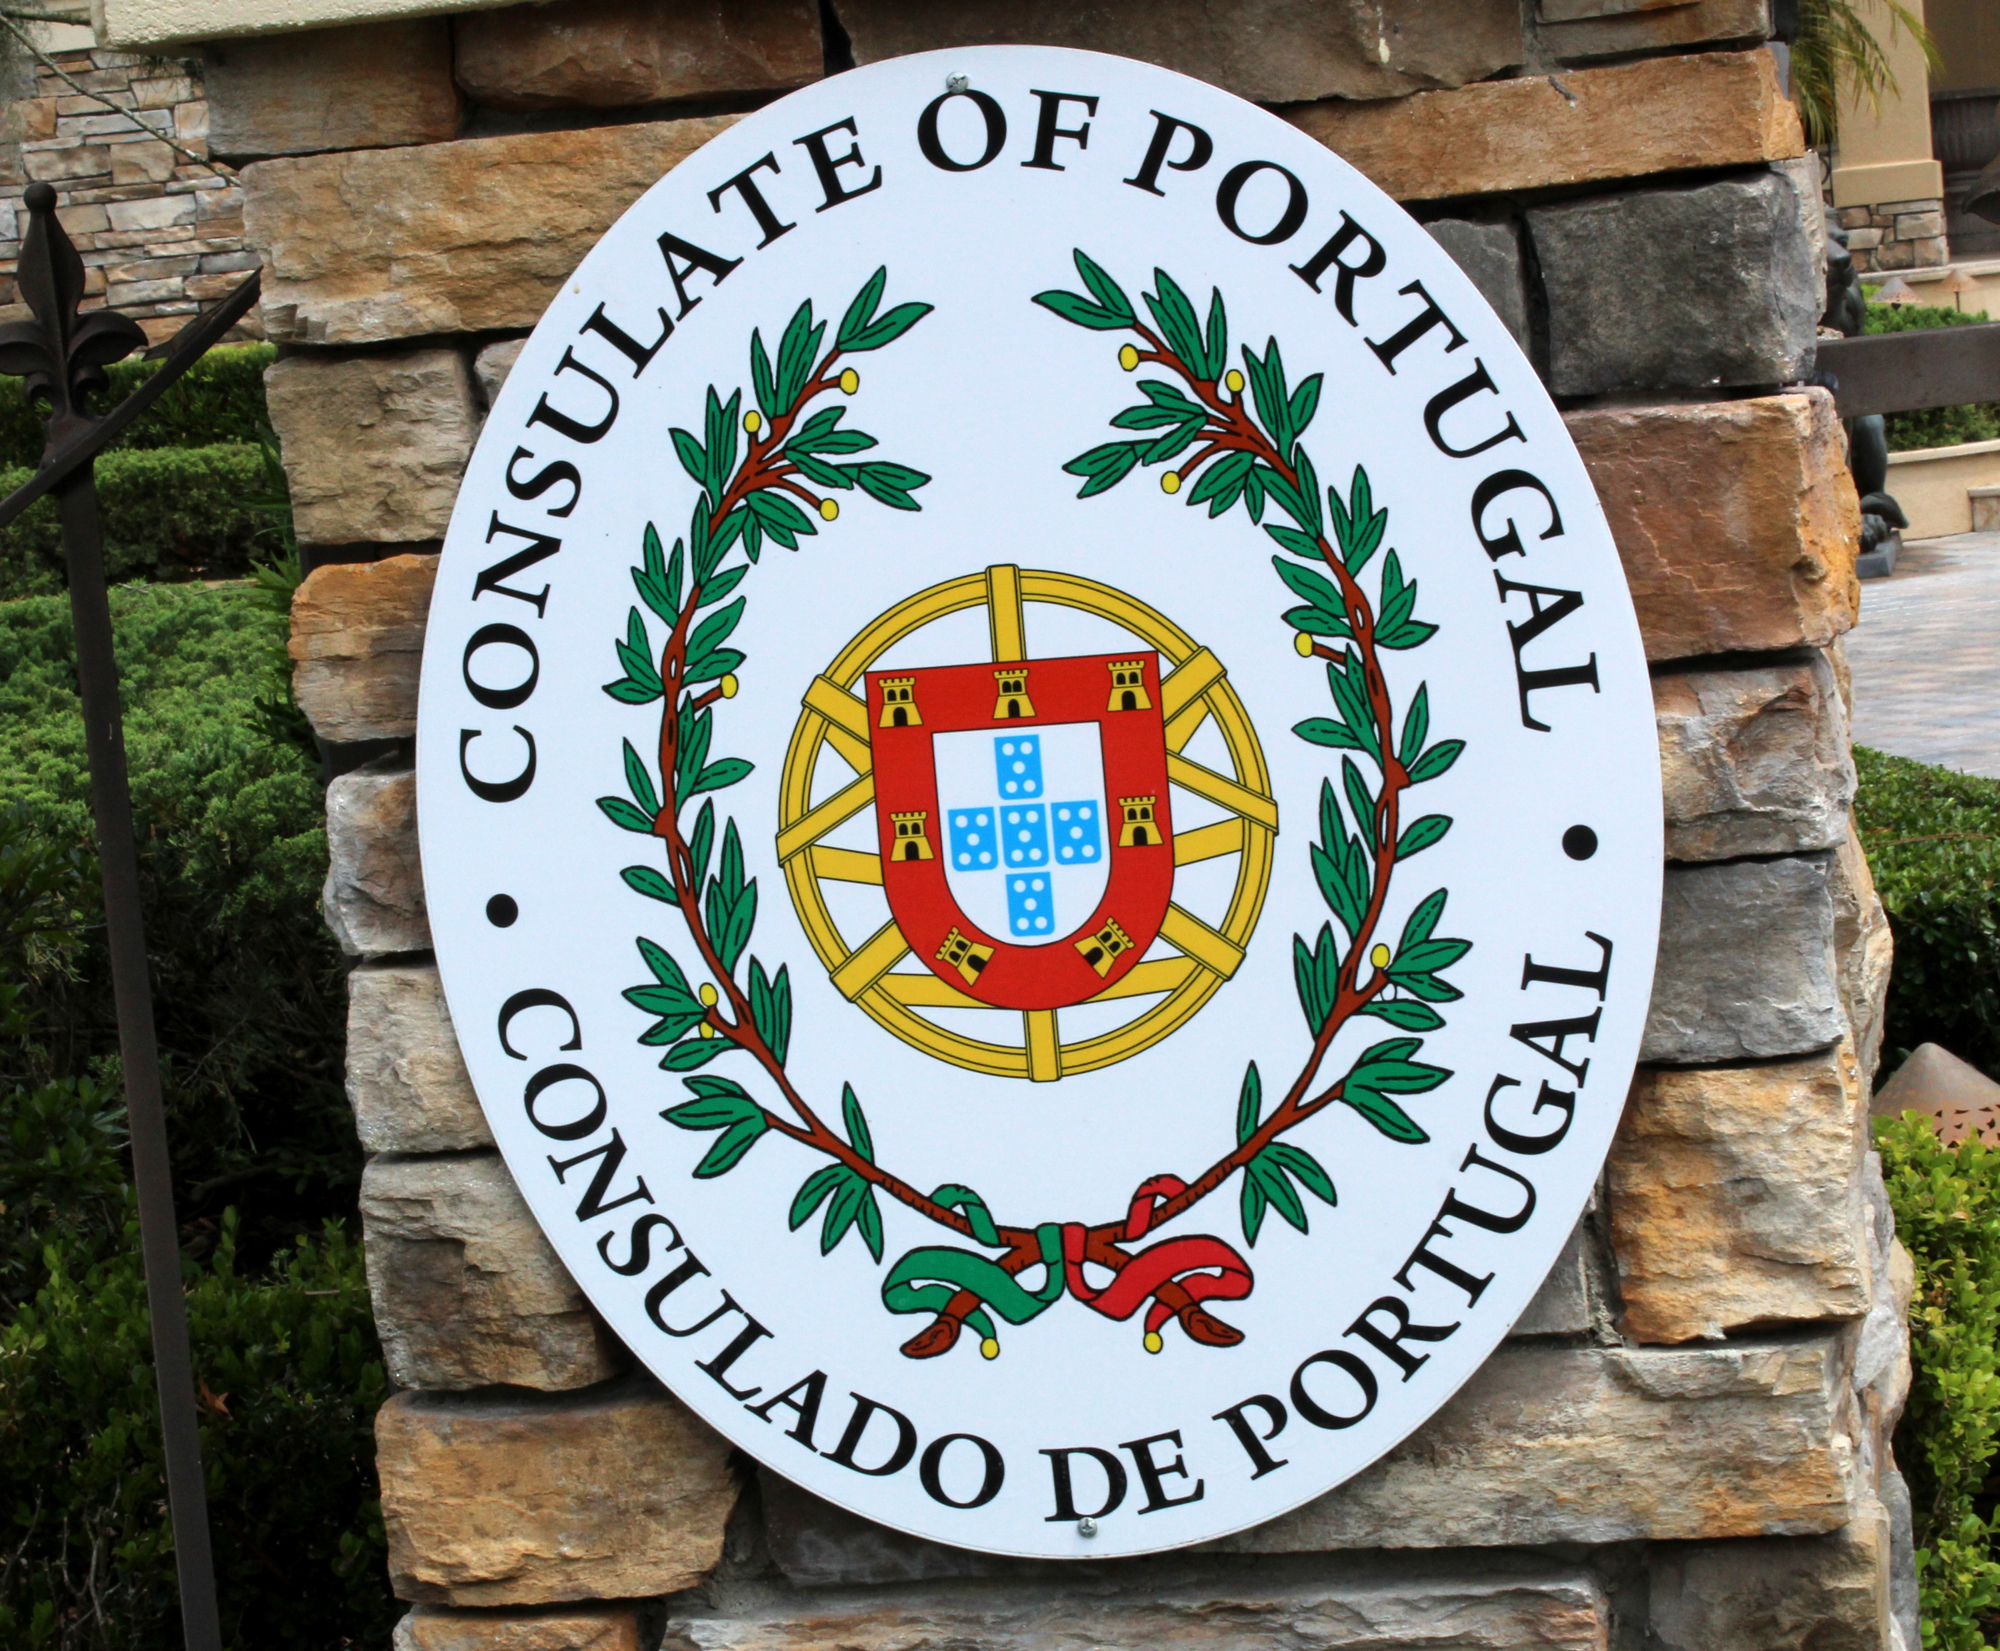 The seal of Portugal adorns the entrance to the consul's home in Plantation Bay. Photo by Jacque Estes